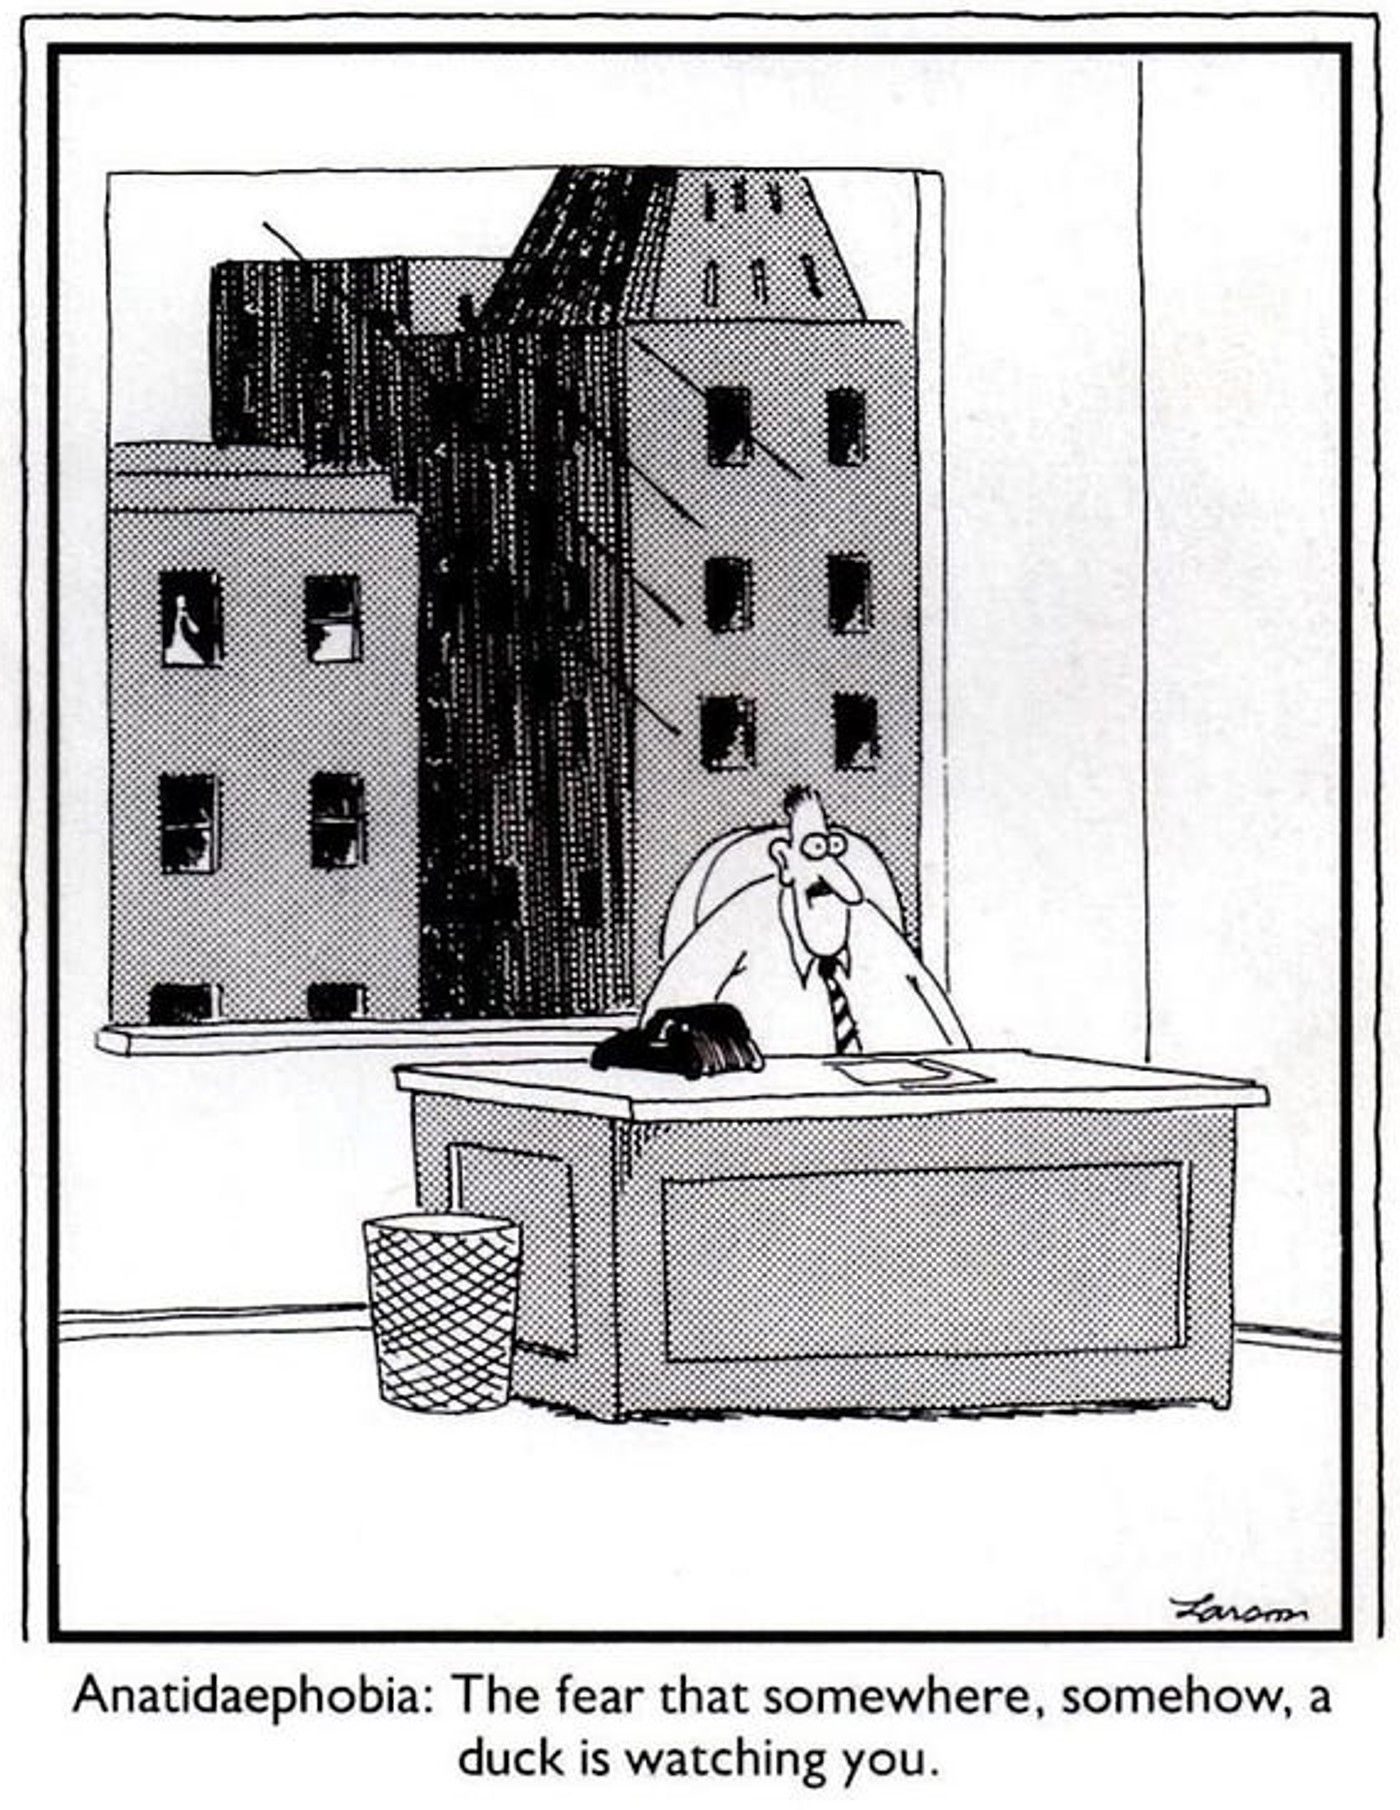 the far side Anatidaephobia the fear that somewhere somehow a duck is watching you